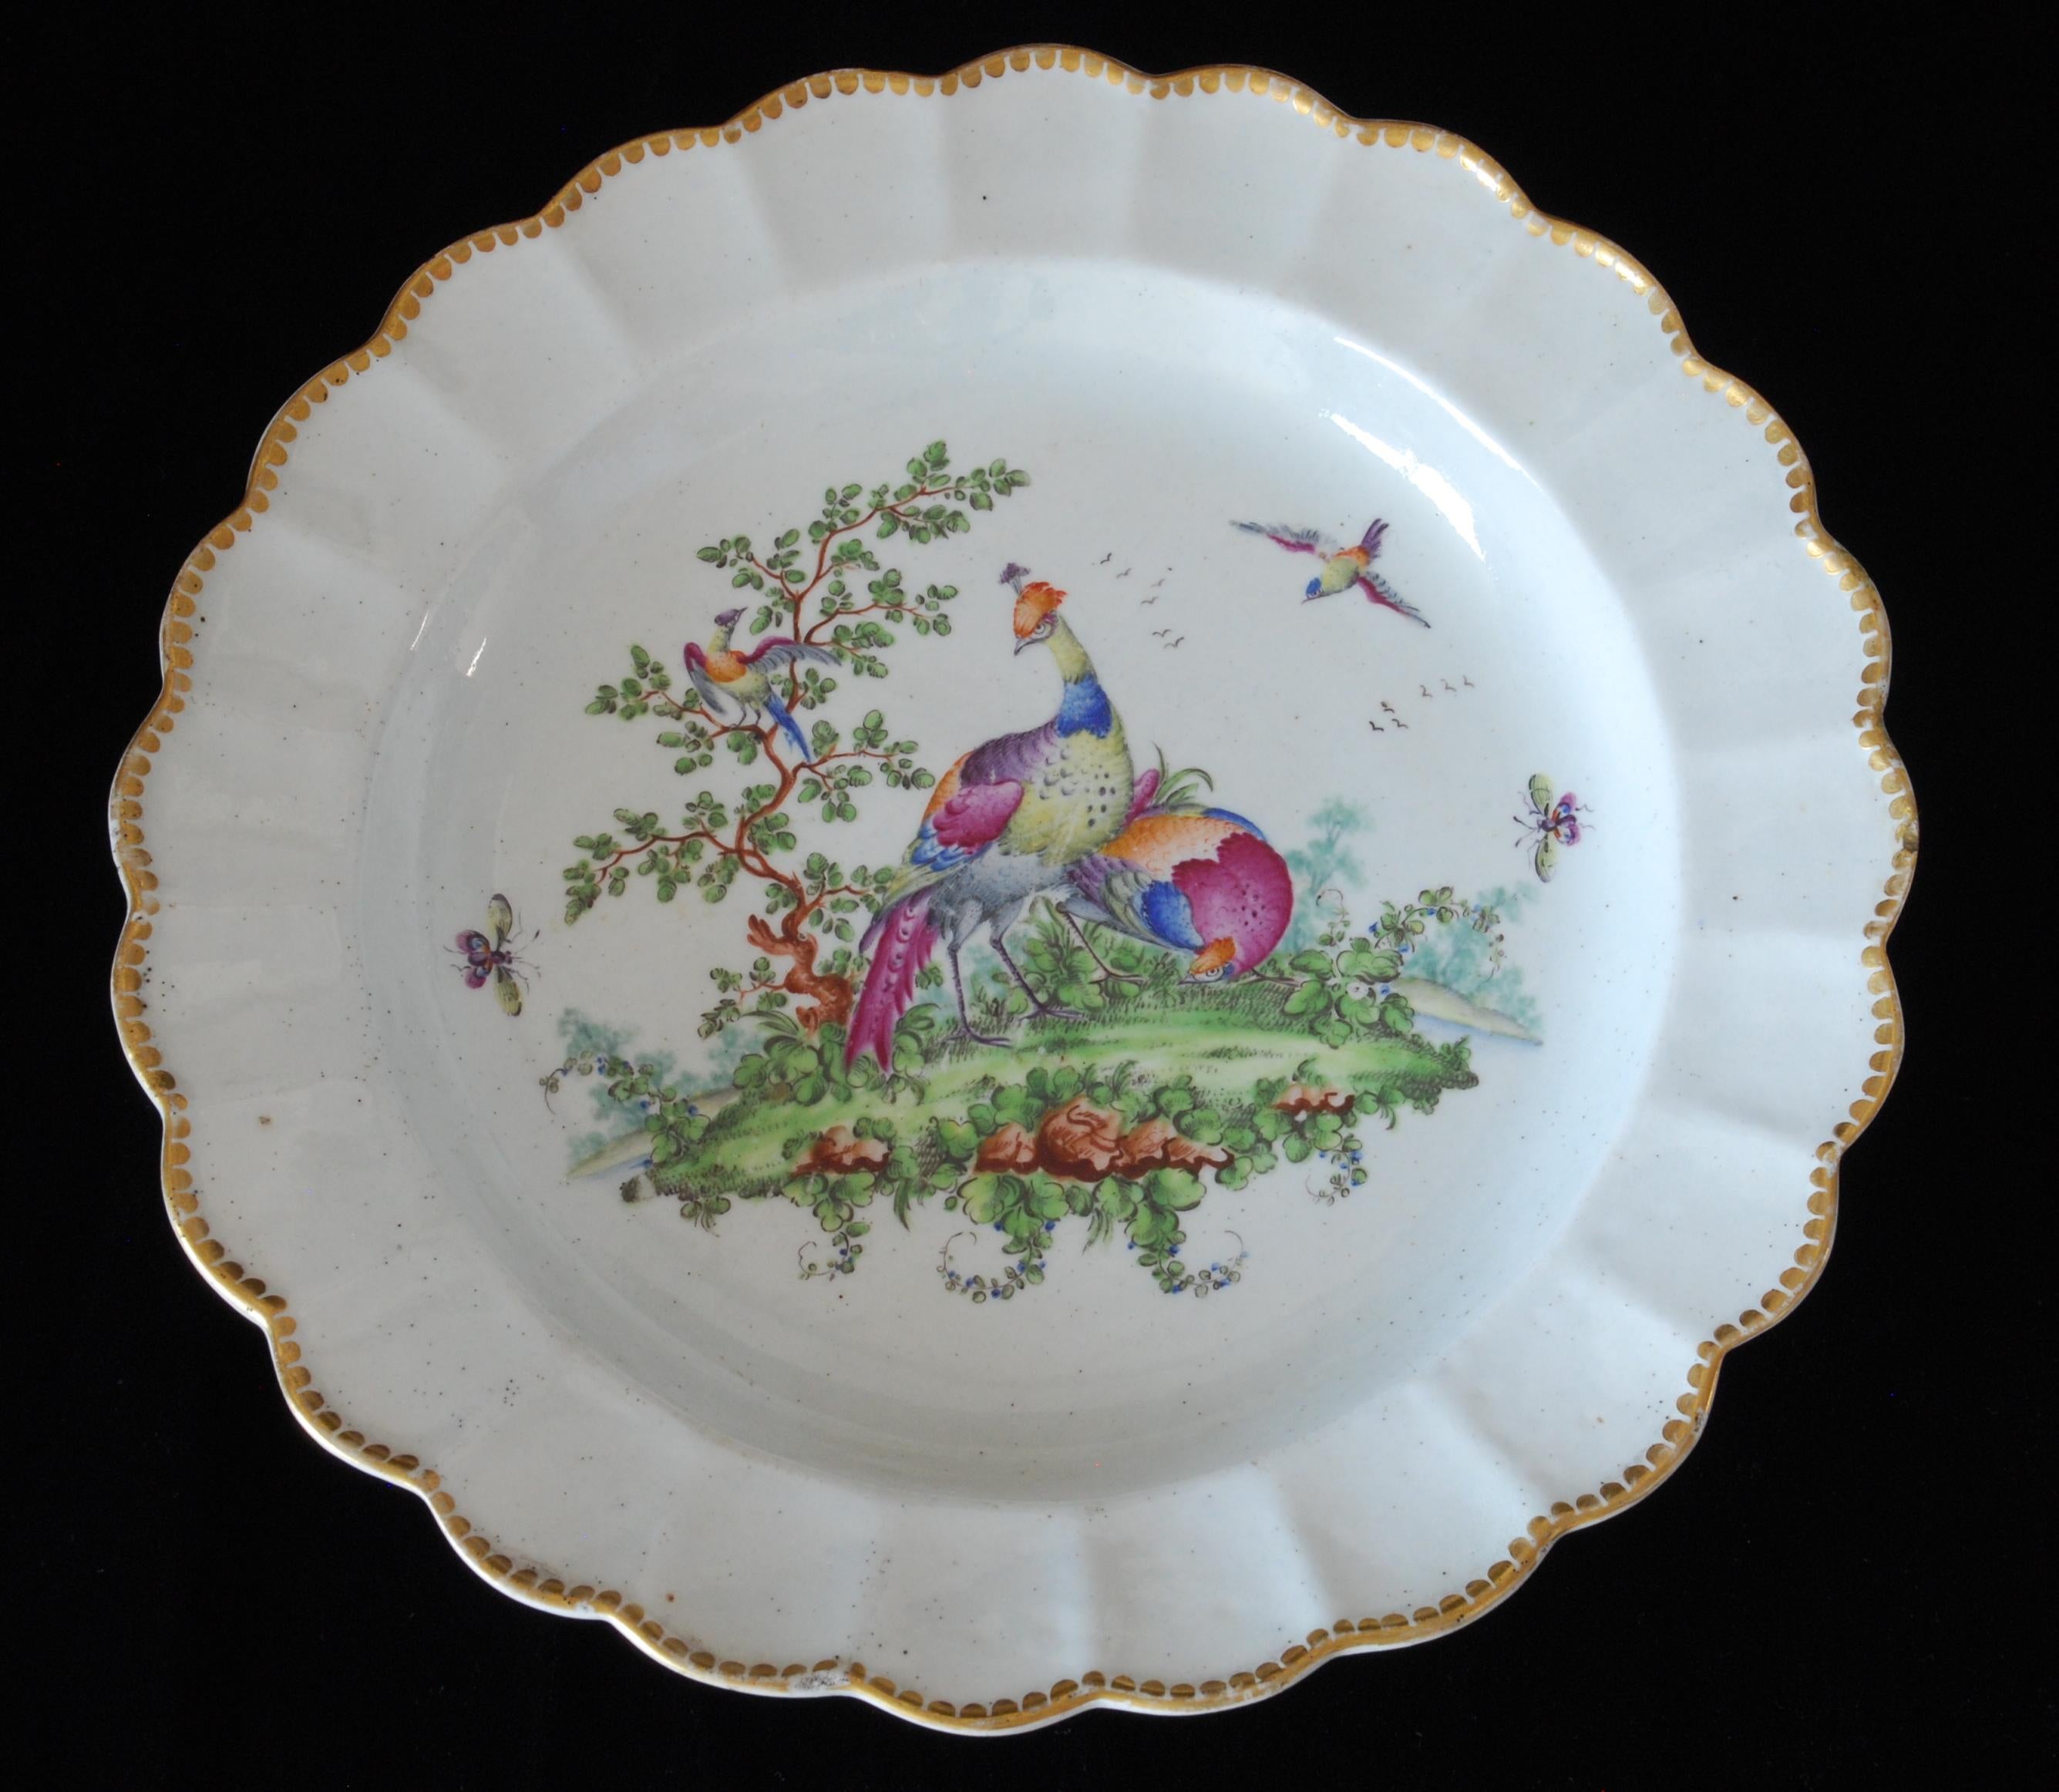 A dessert plate, from a large service made by Worcester around 1770. Decorated with Exotic Birds in the style of George Davis.

George Davis was a highly skilled and talented china decorator who worked for the Worcester porcelain factory in the